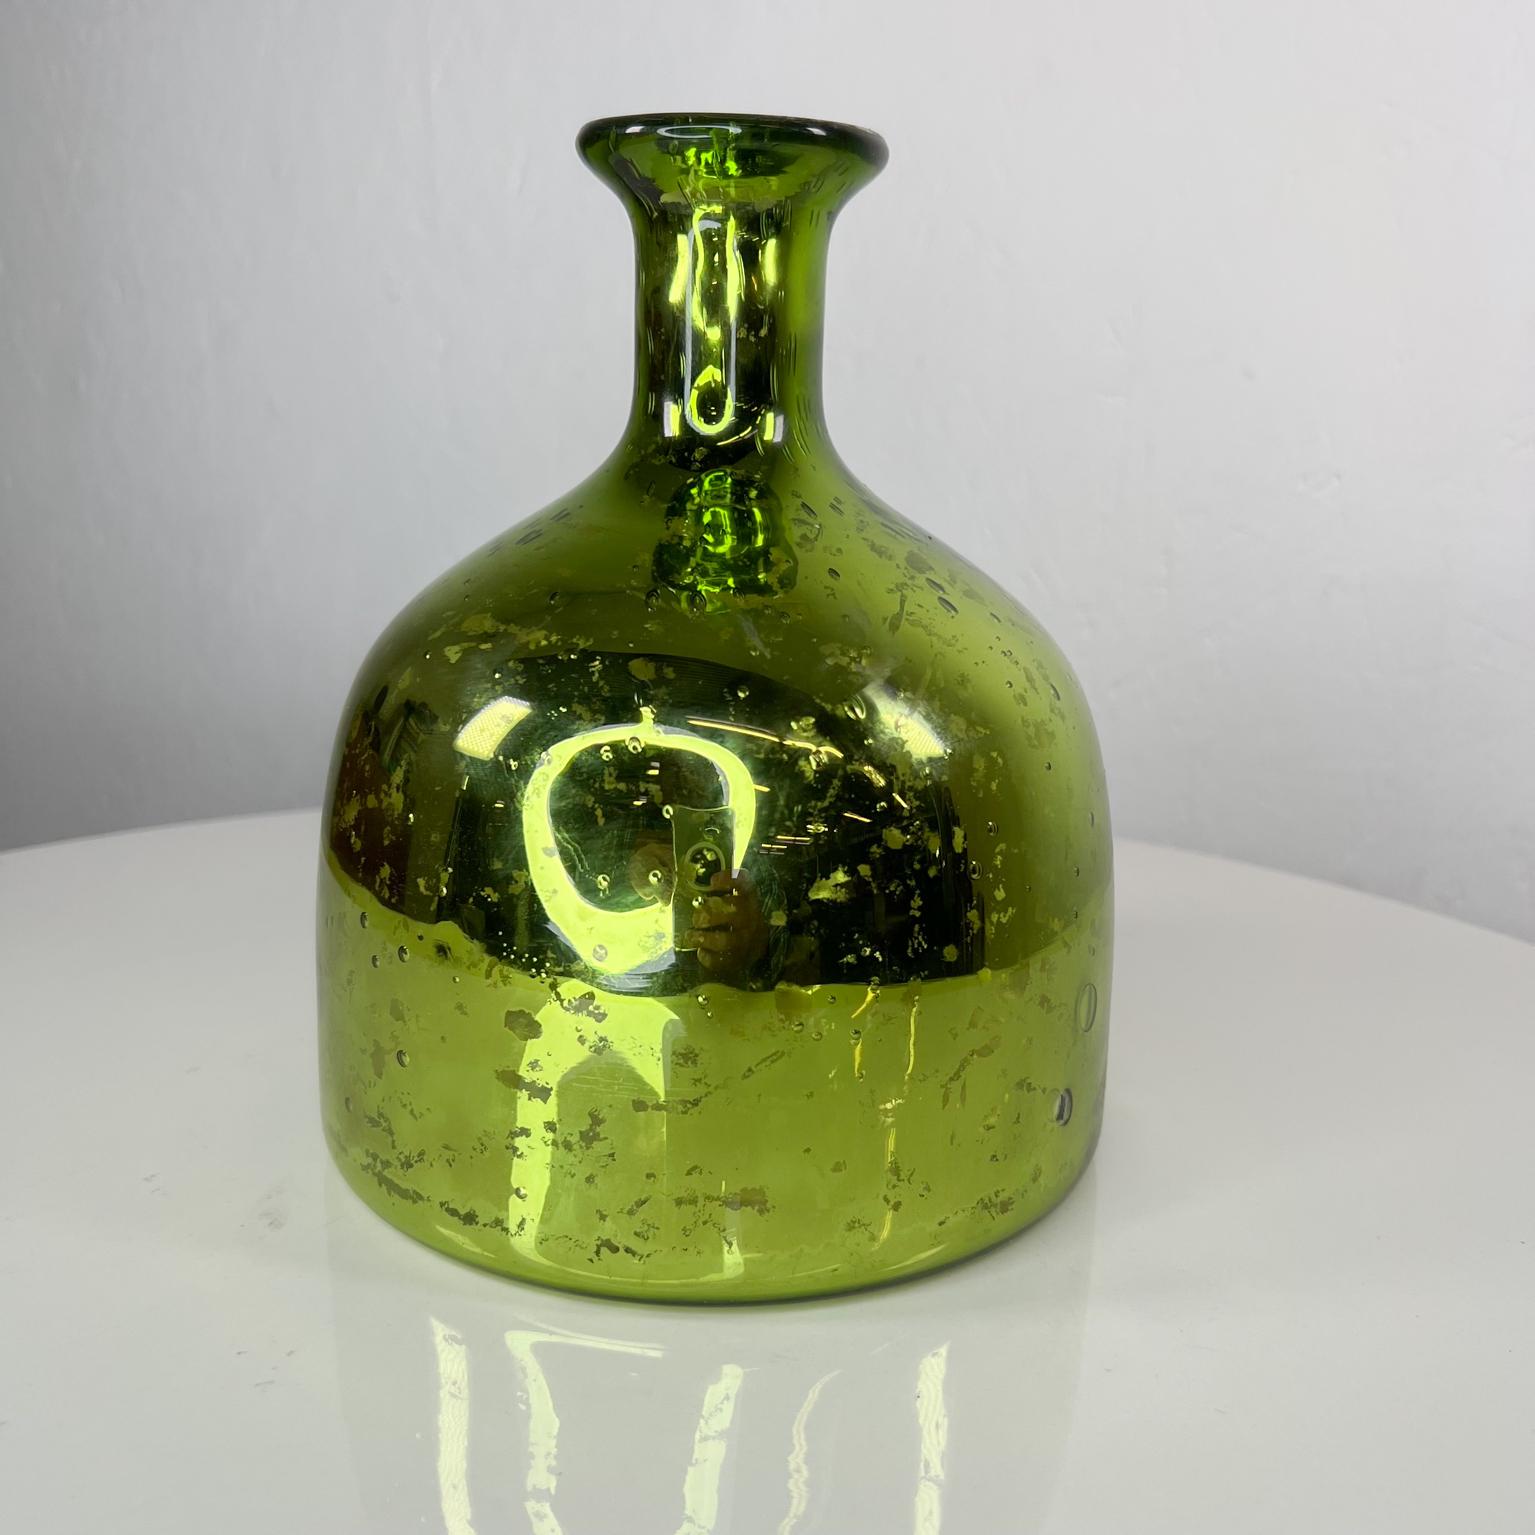 Vintage Modern green vase in Mercury glass
Measures: 7.88 tall x 6.5 diameter 
Original vintage condition. Preowned unrestored wear present.
Review images.